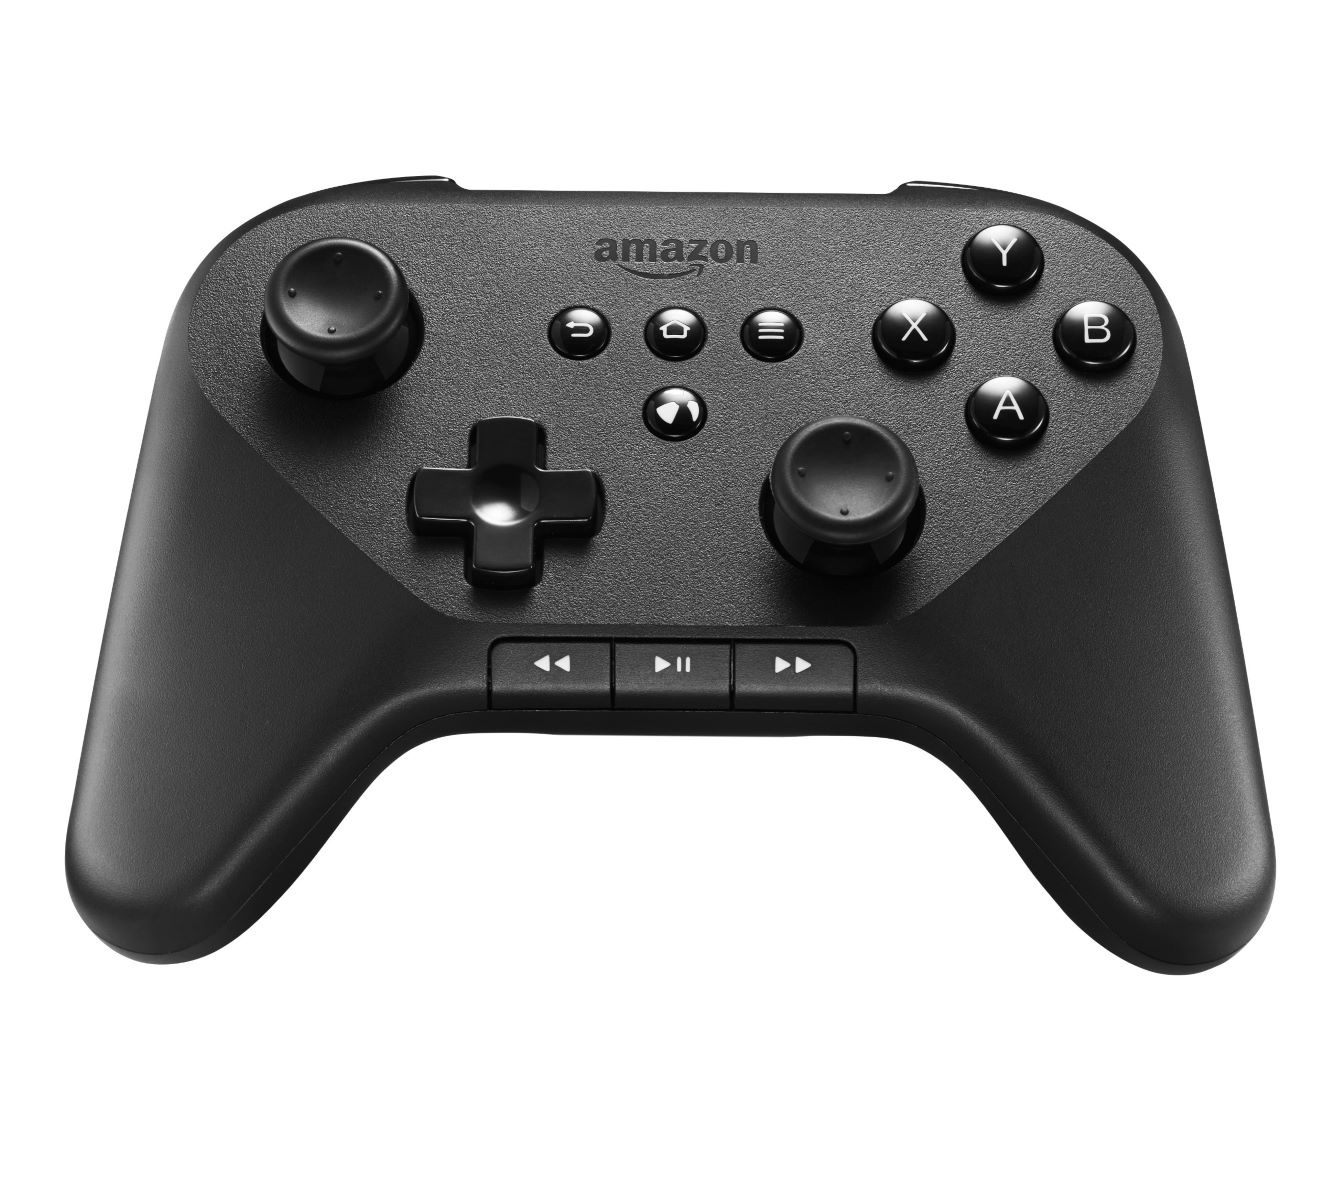 How To Pair An Amazon Fire Game Controller With PC